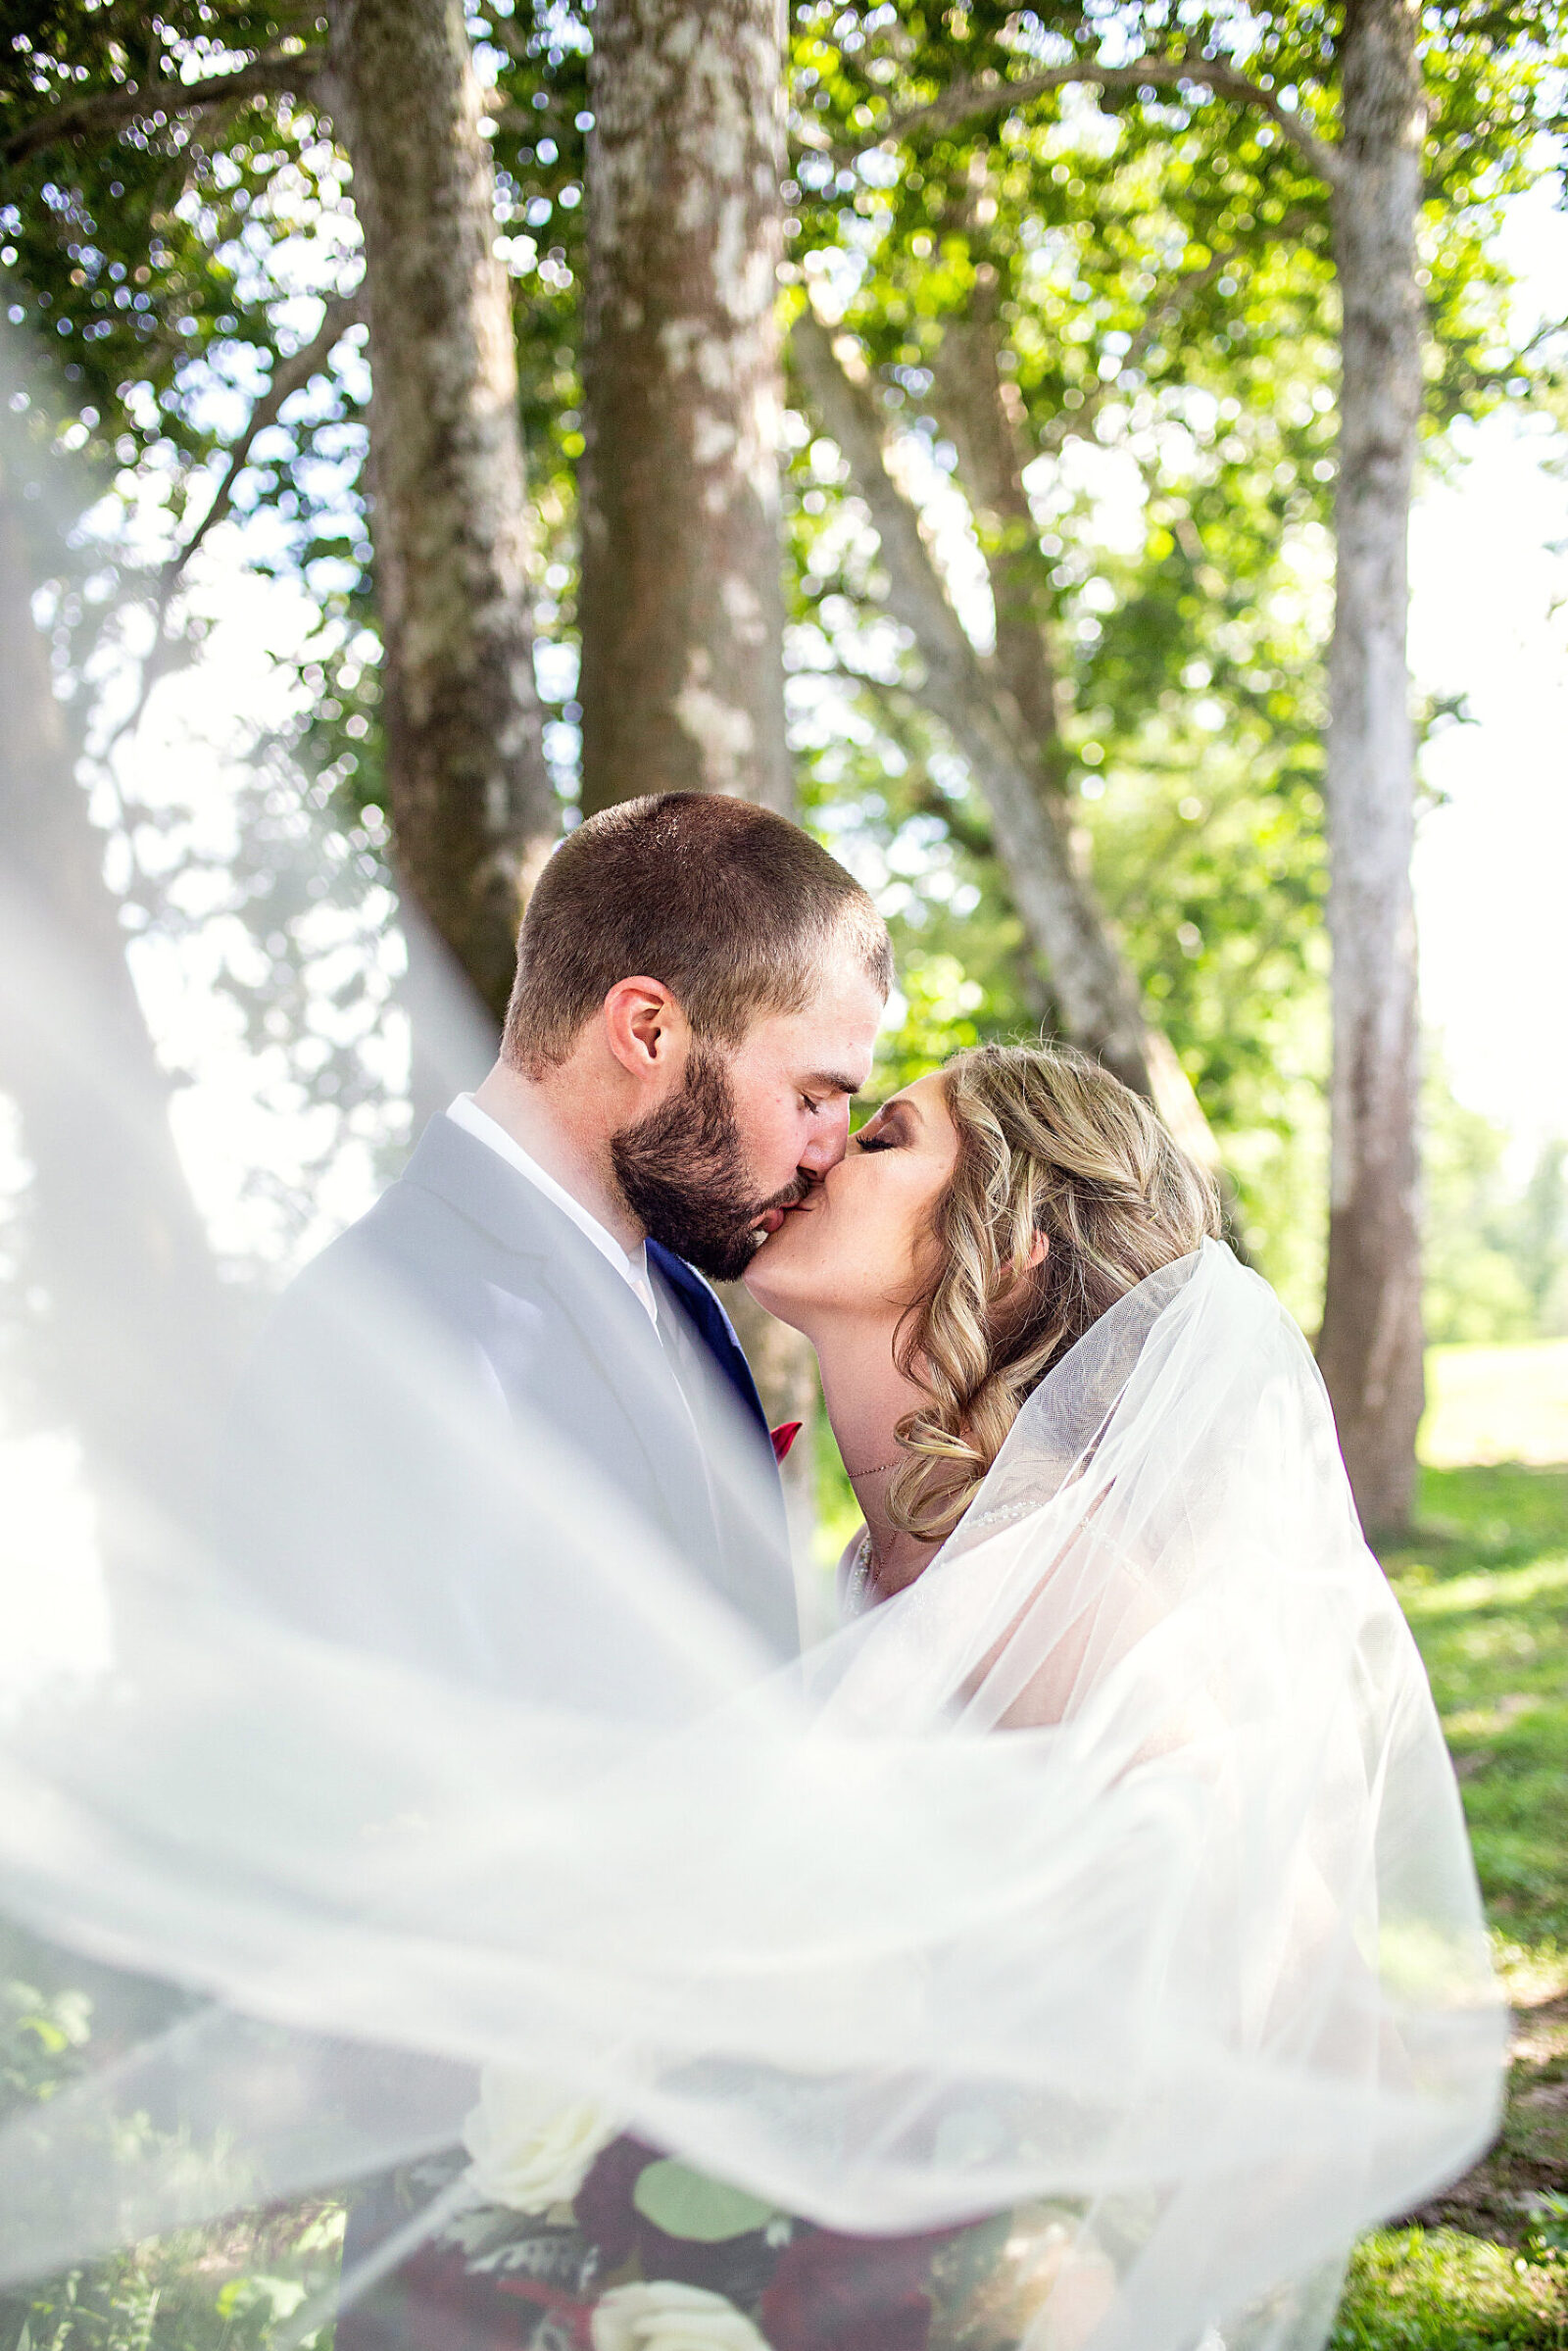 Justin & Meghan's 5 Star Review of Kara Abbey Photography